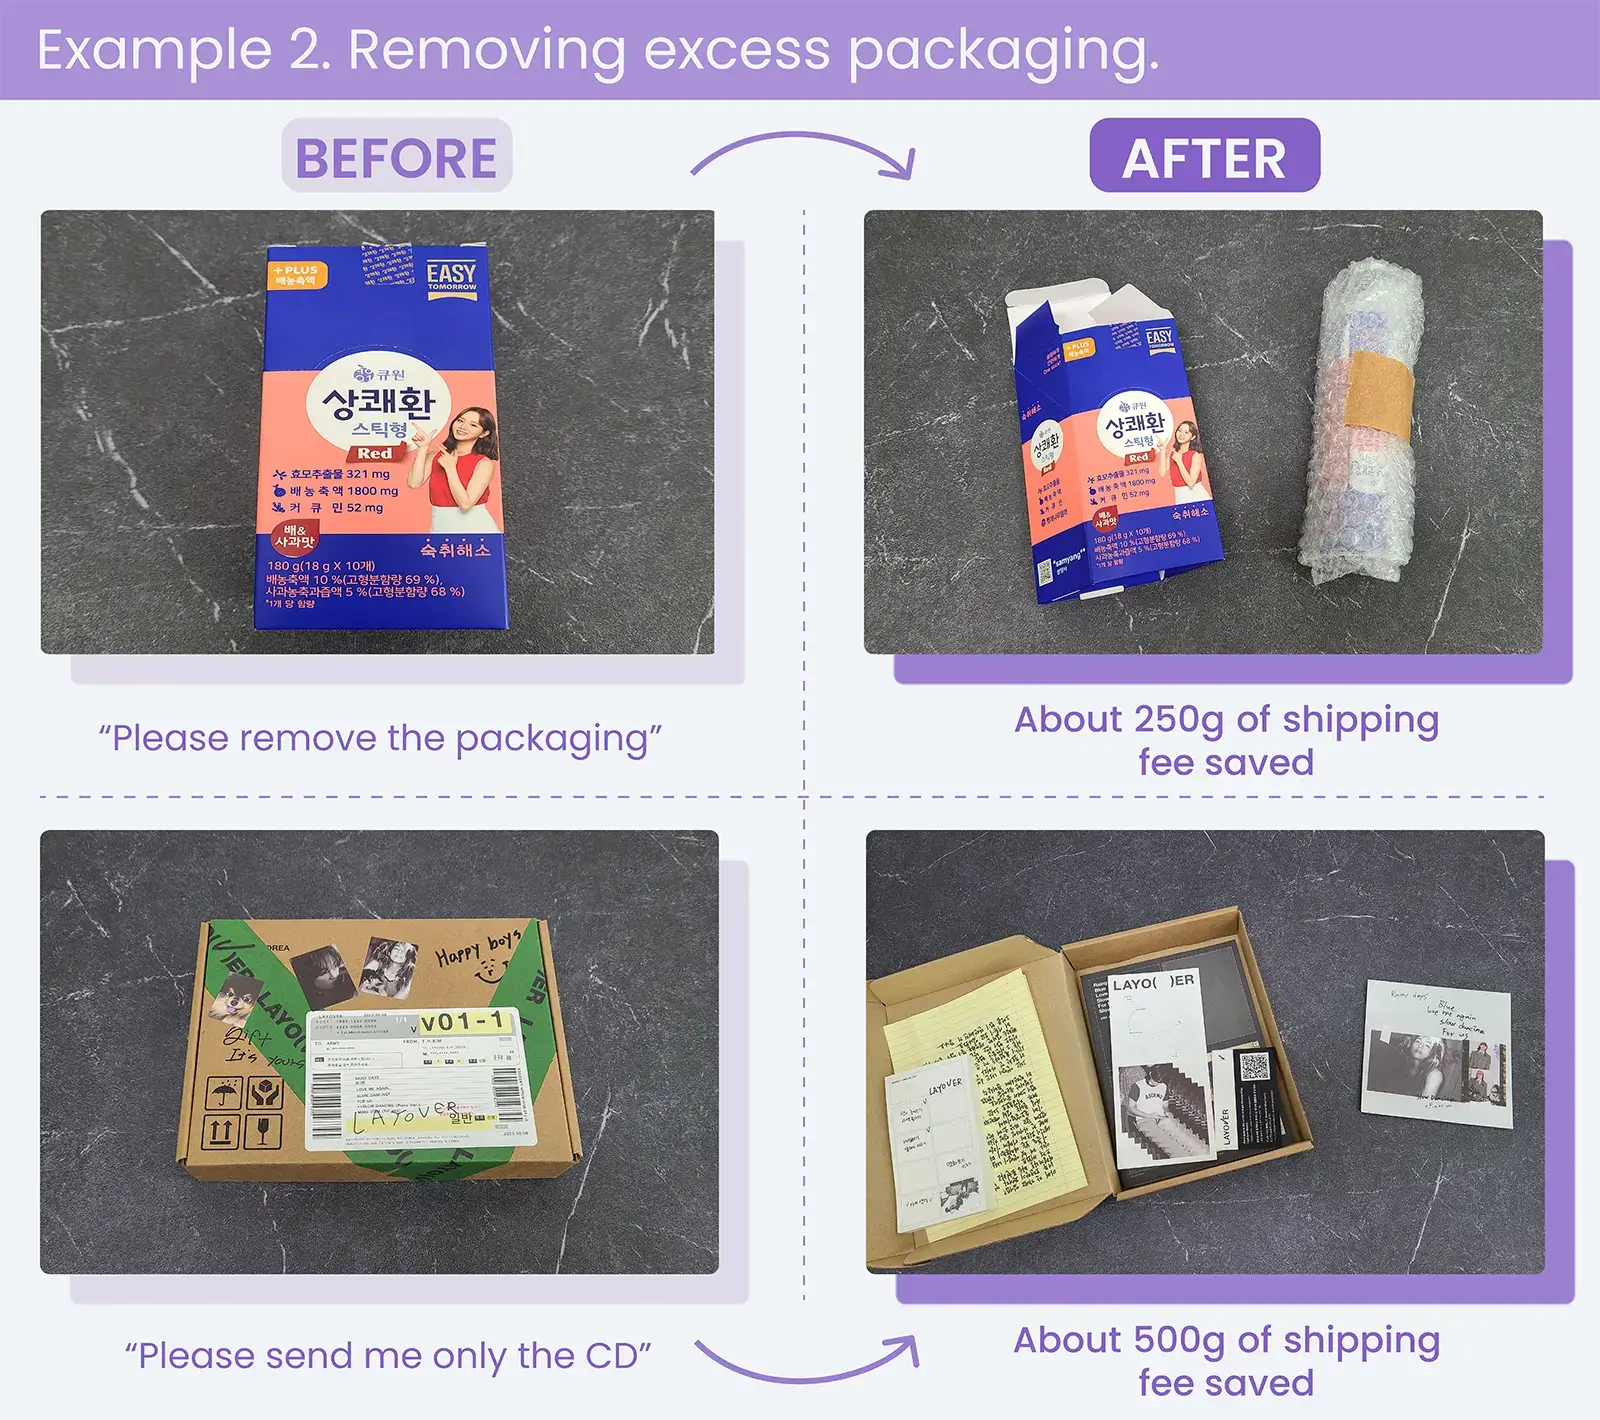 Removing excess packaging when shipping from Korea